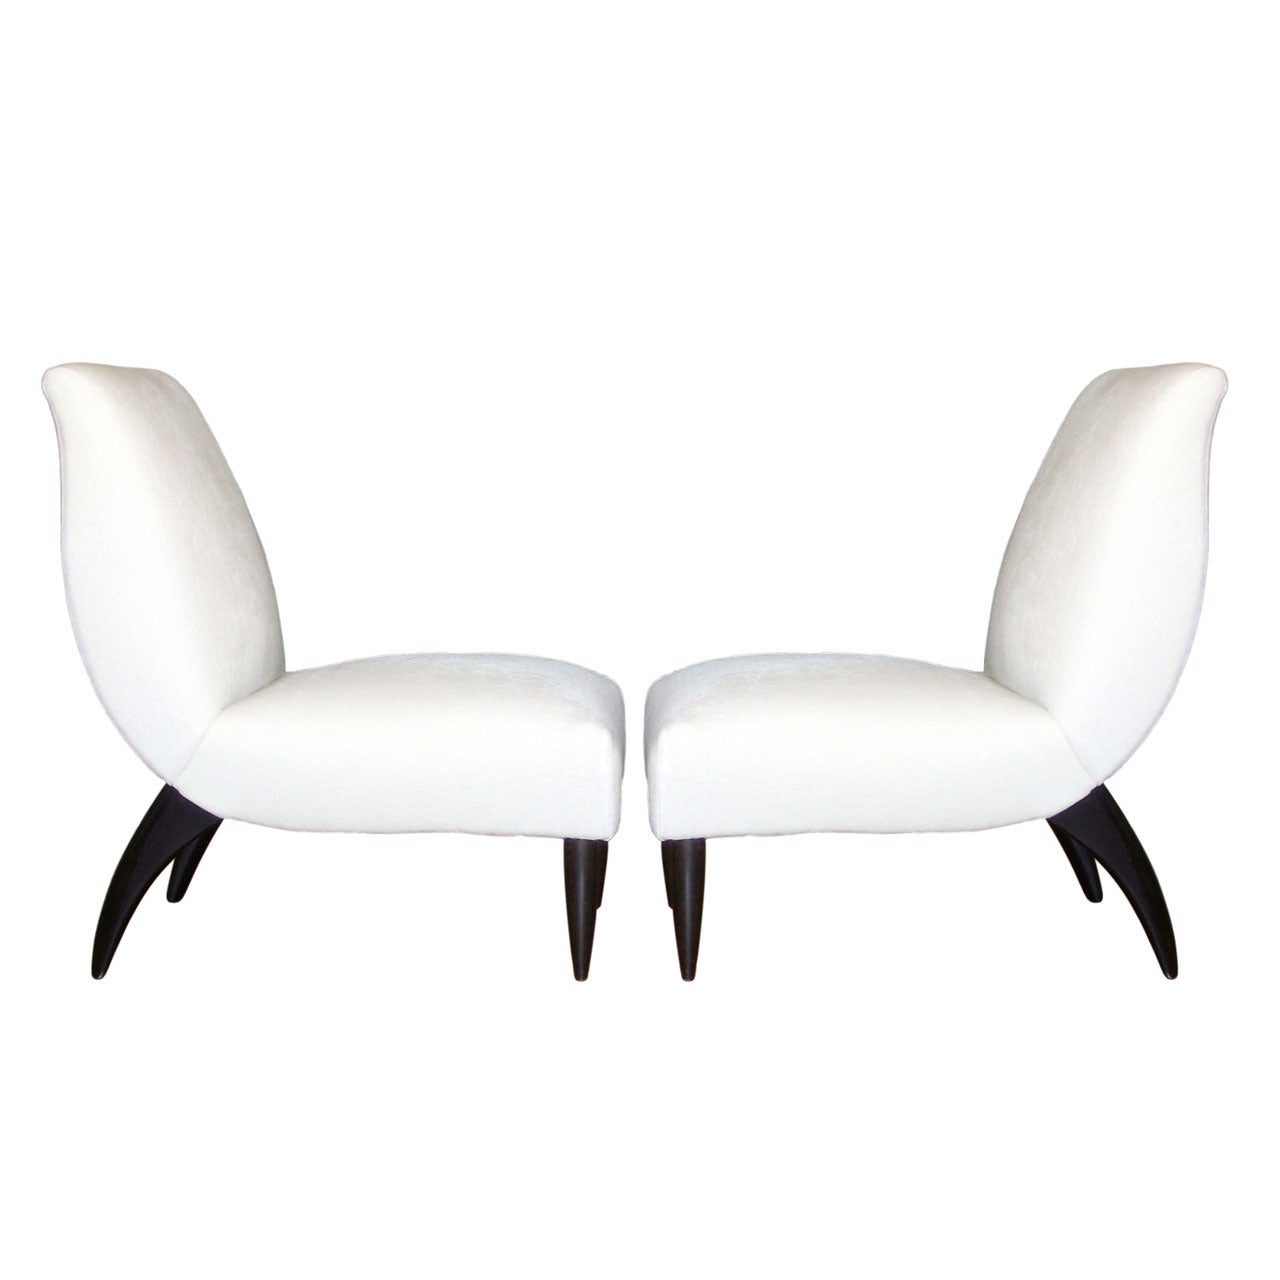 Pair of Italian Slipper Chairs Attributed to Guglielmo Ulrich